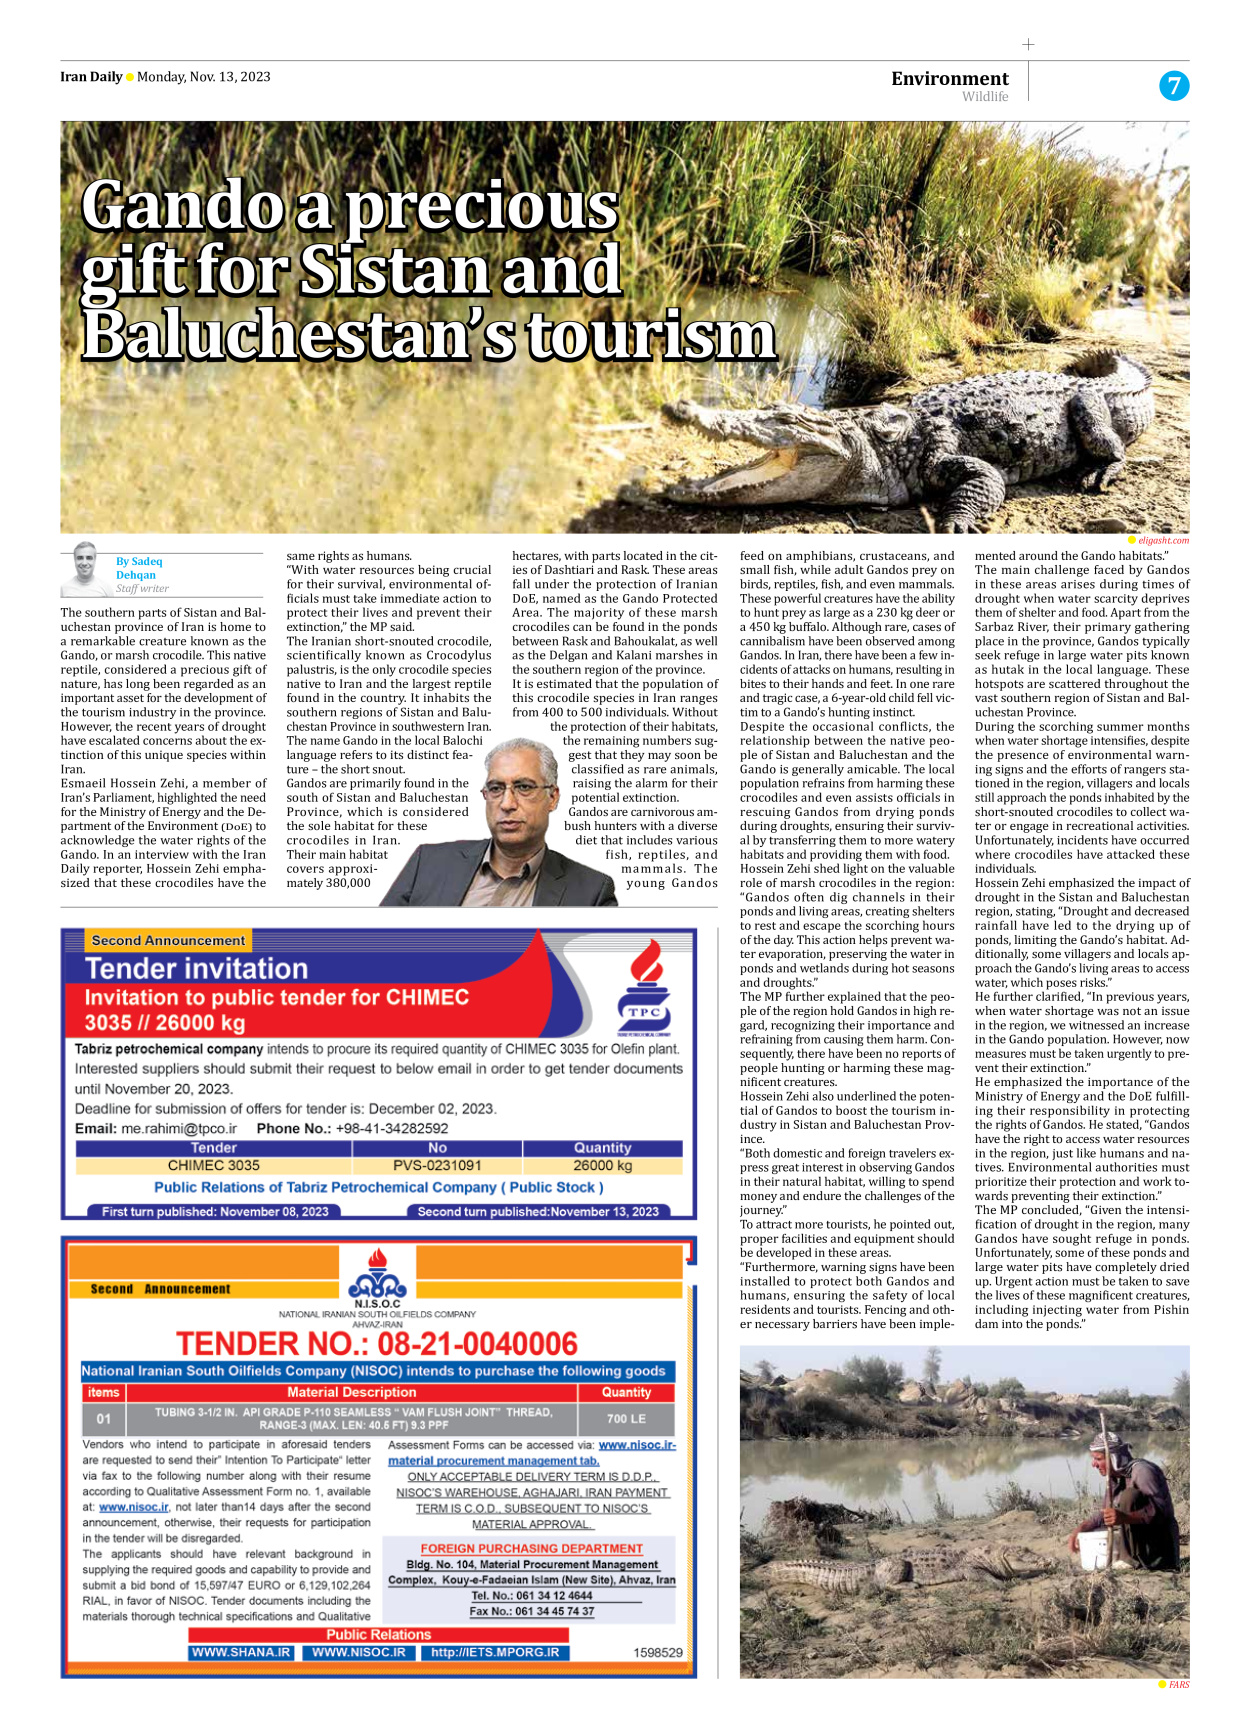 Iran Daily - Number Seven Thousand Four Hundred and Thirty Three - 13 November 2023 - Page 7